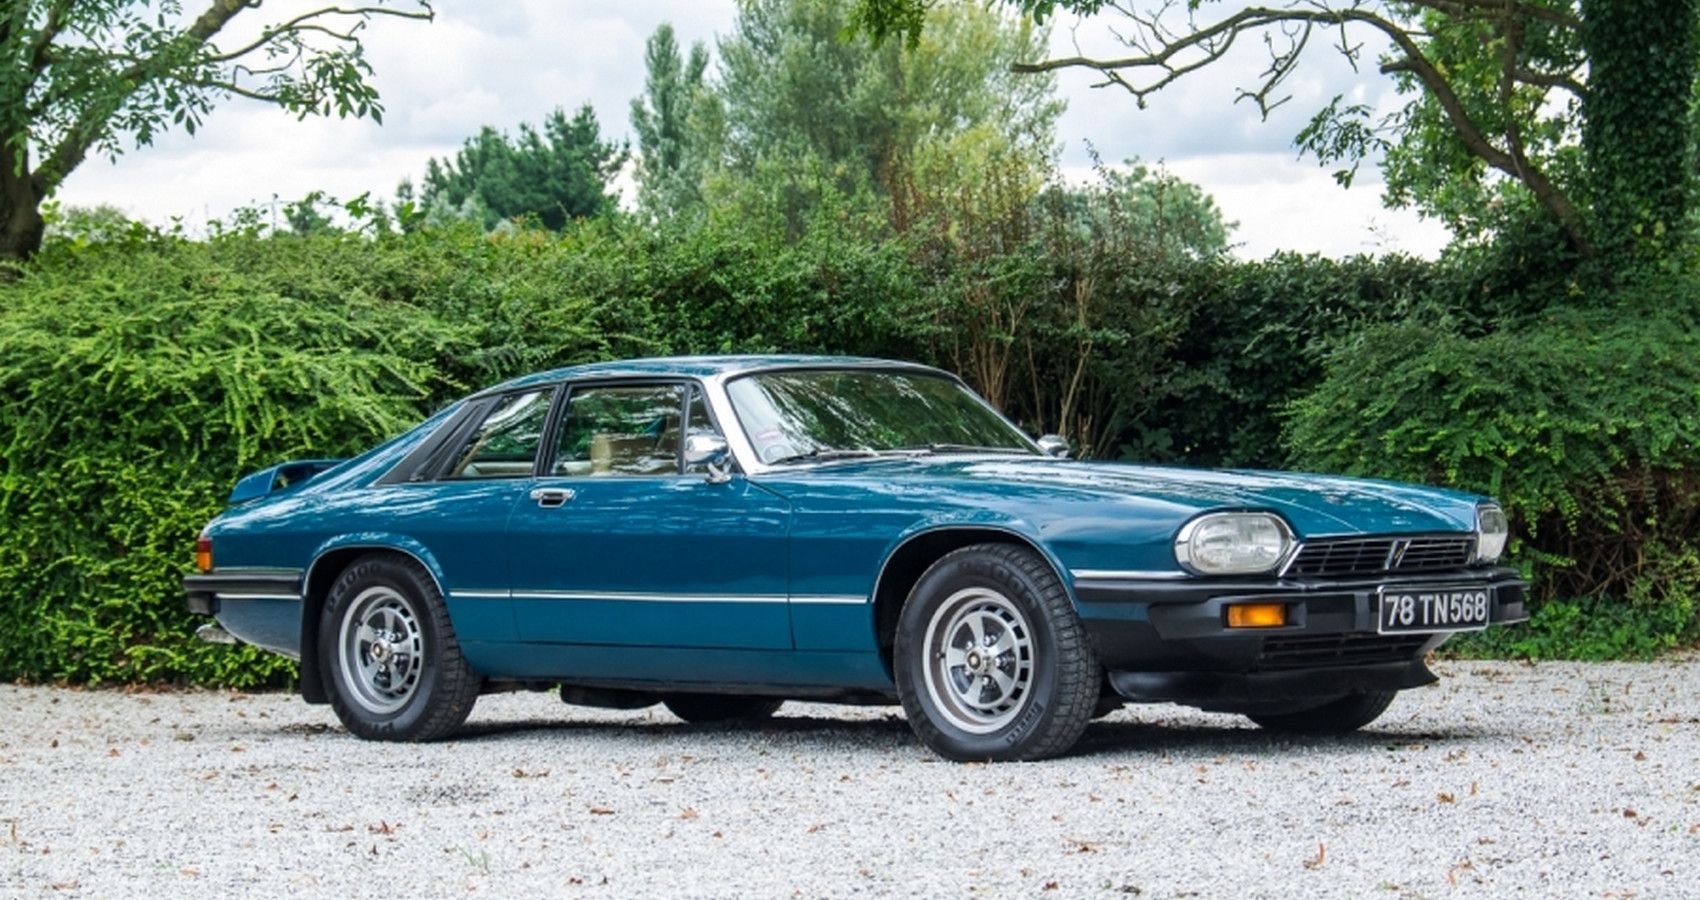 These Classic Cars Are The Best Way To Look Rich For $10,000